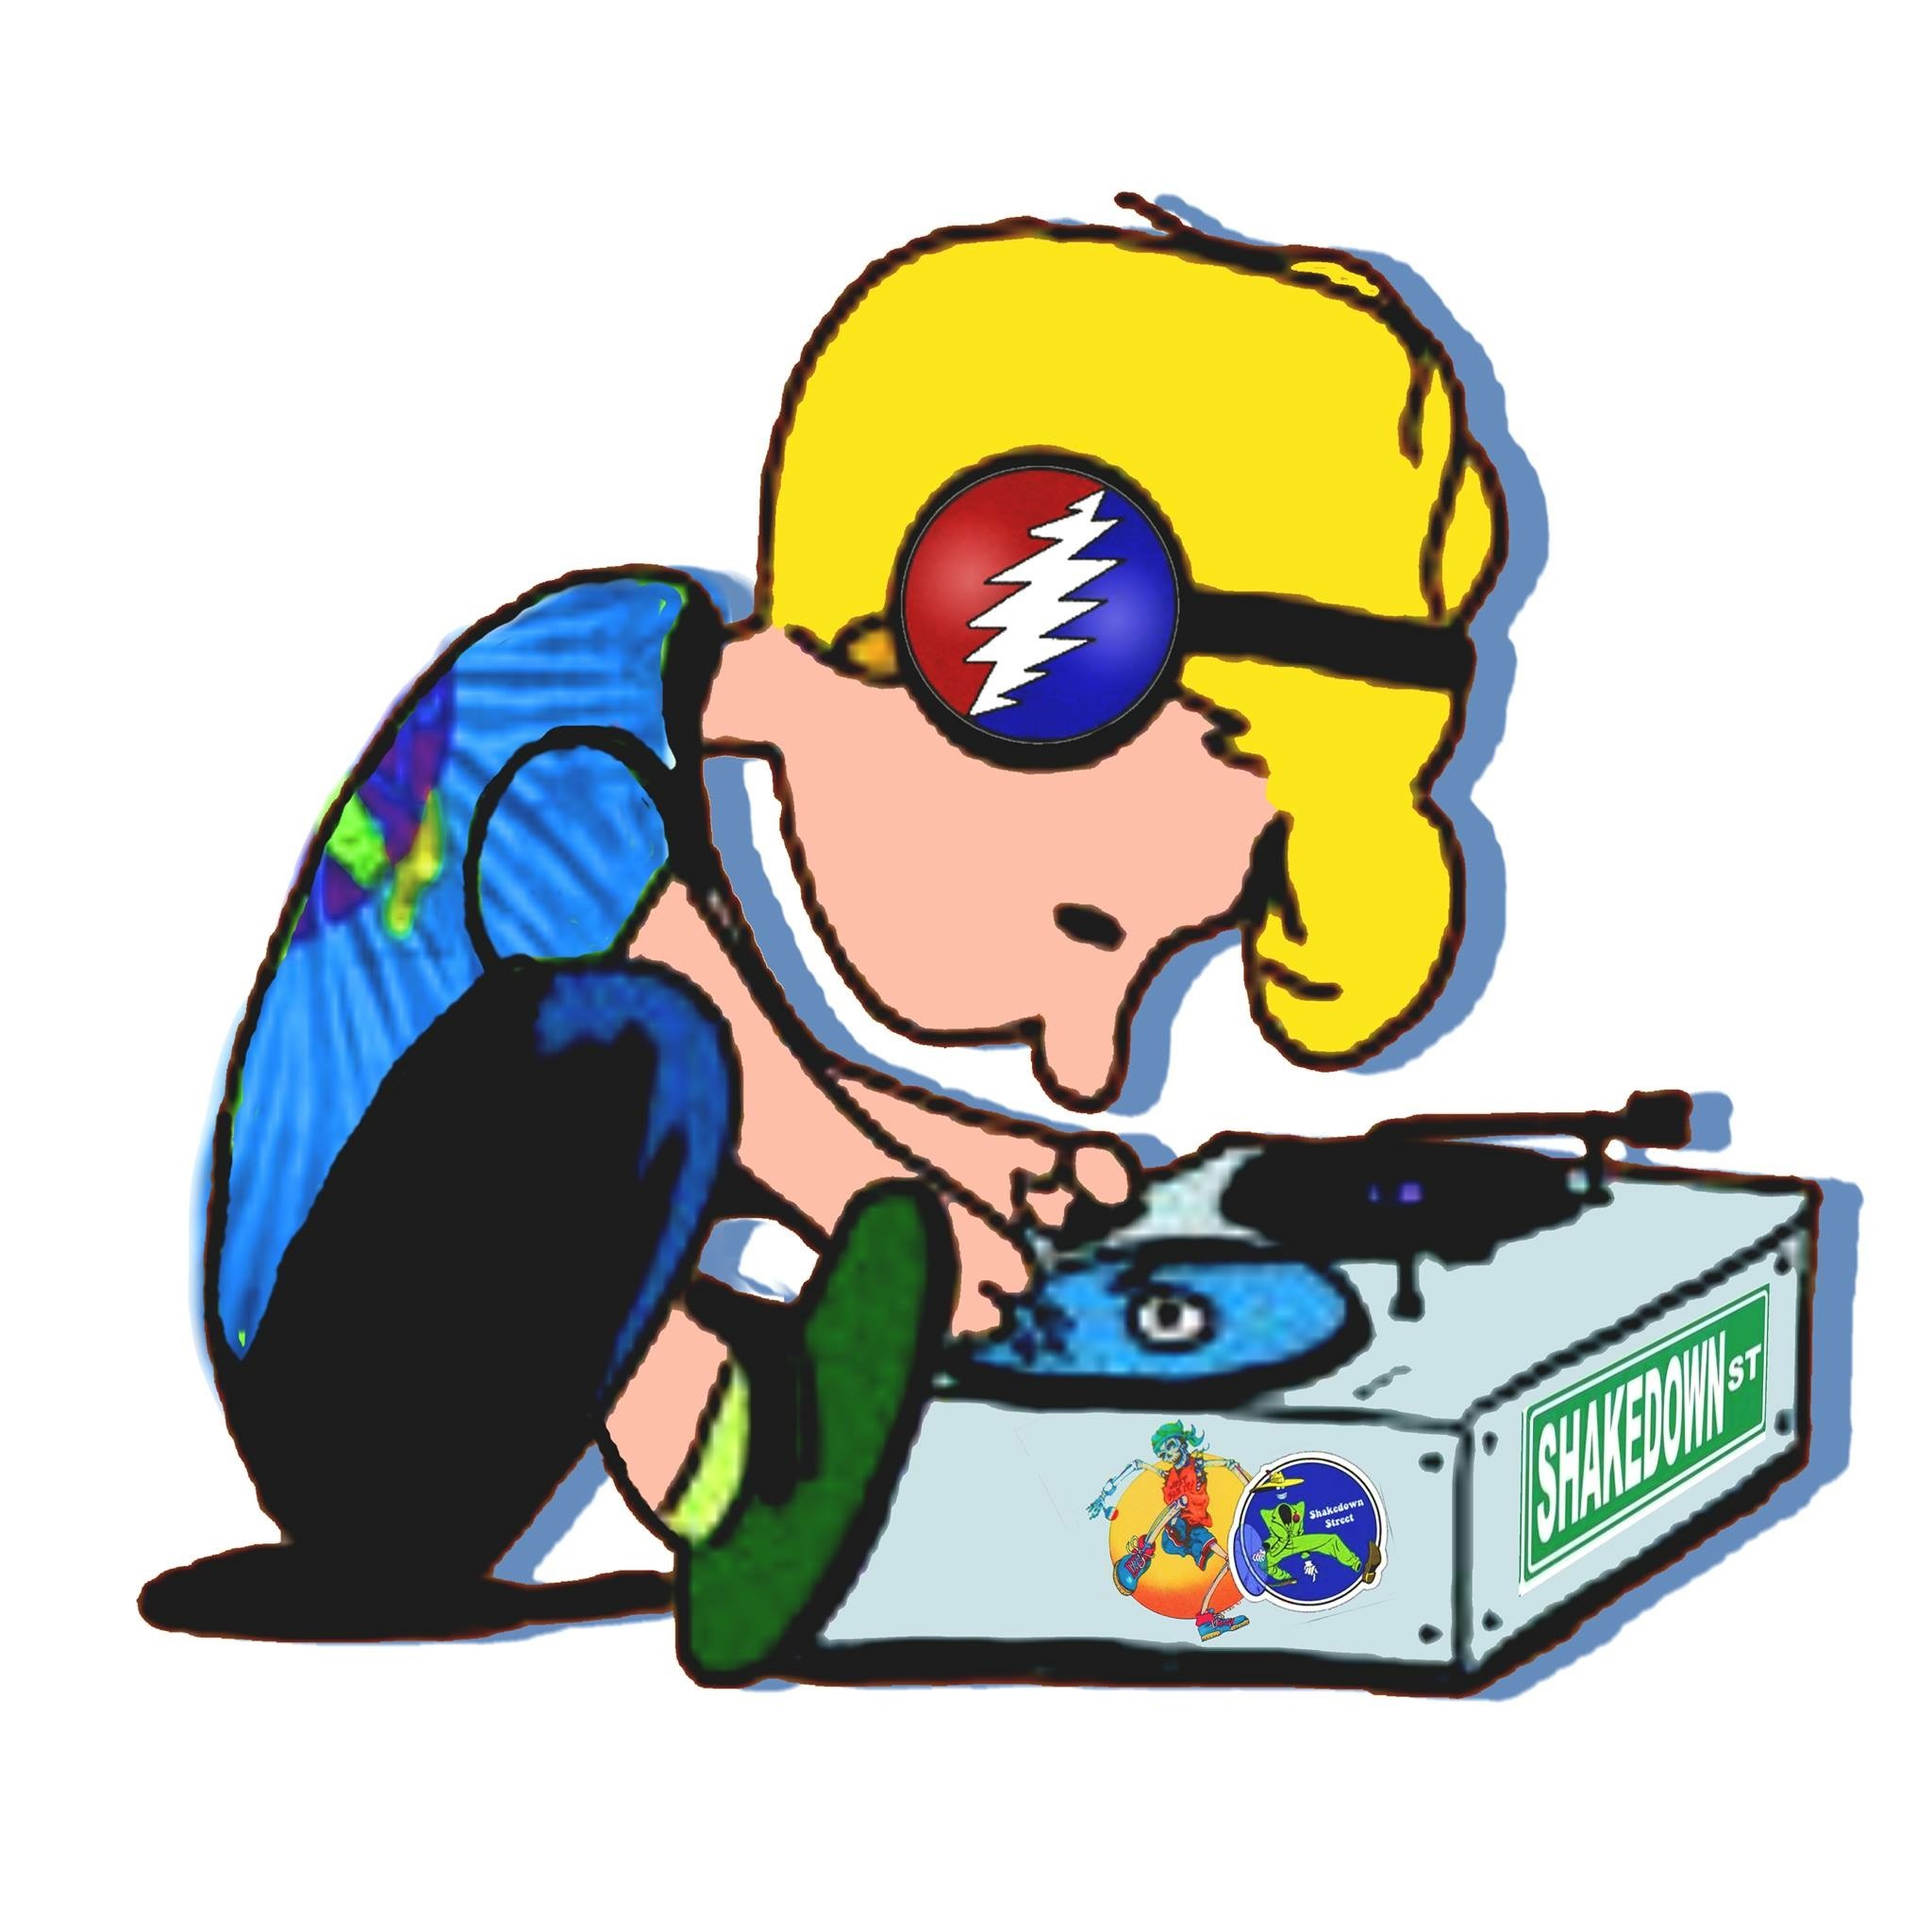 2048x2048 Grateful Dead, Charlie Brown, Snoopy, Google Search, Peanuts, Cartoons